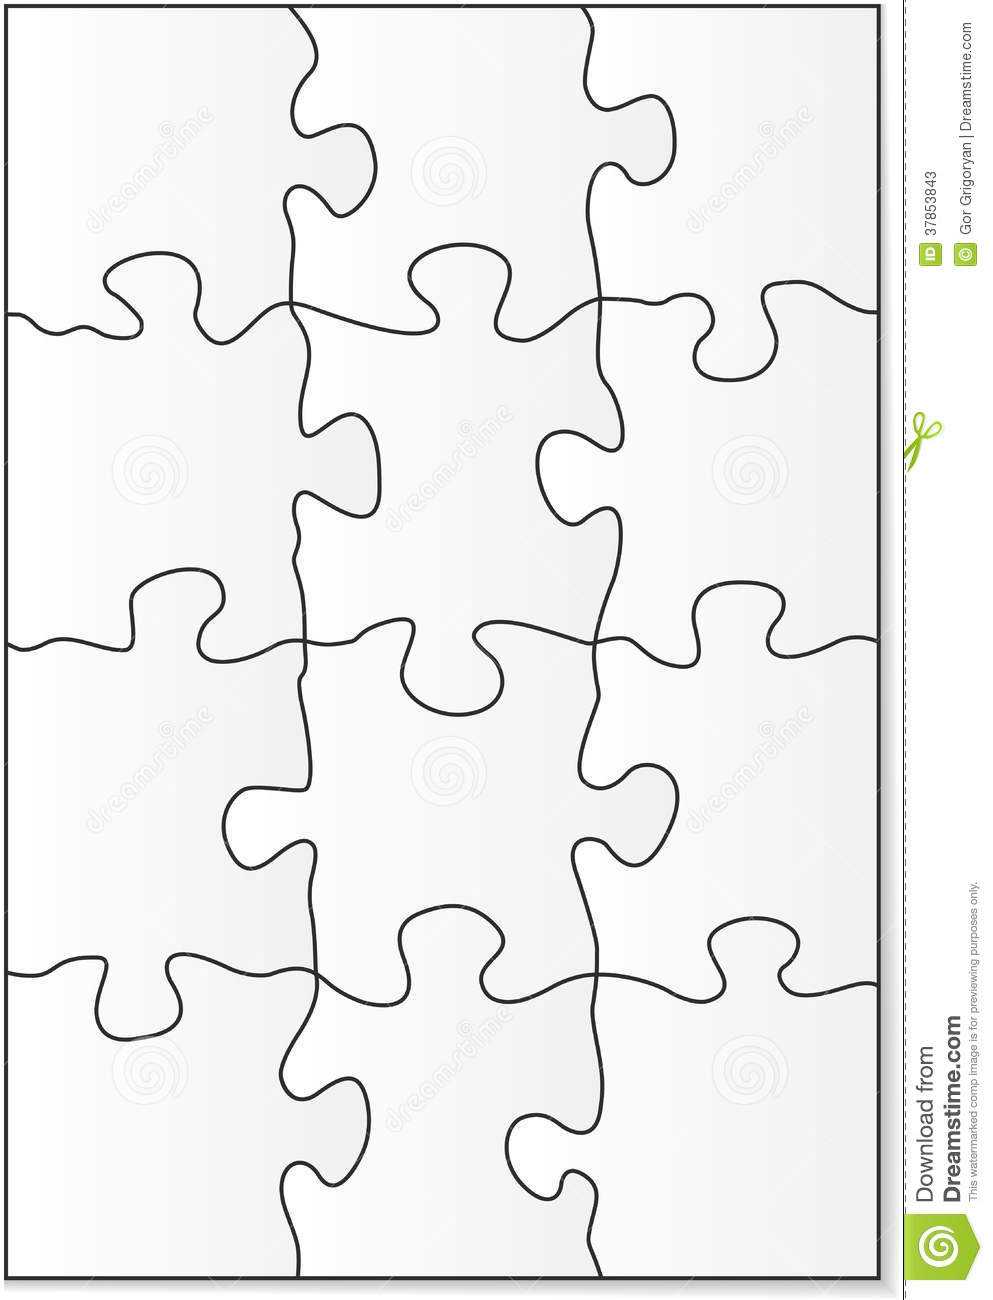 12 Piece Puzzle Template Stock Vector. Illustration Of Inside Blank Pattern Block Templates